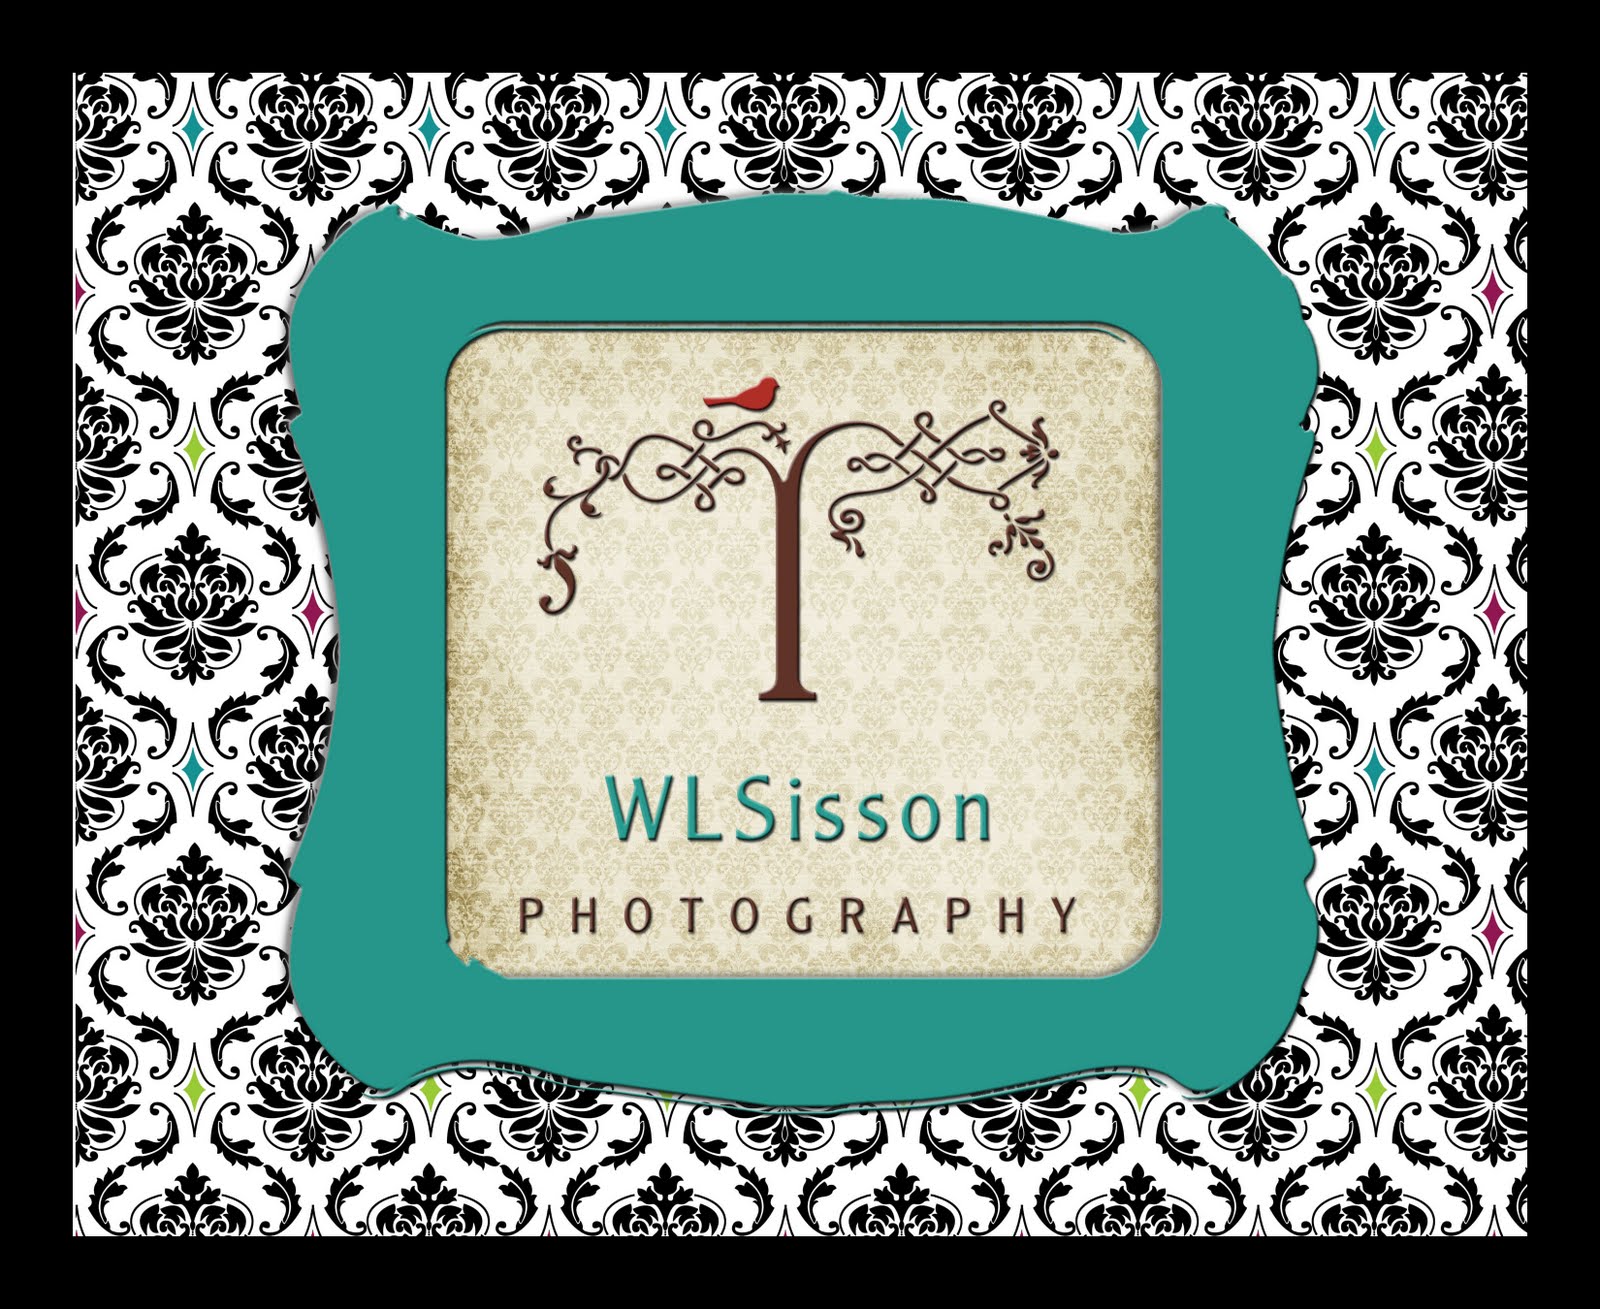 WLSisson Photography